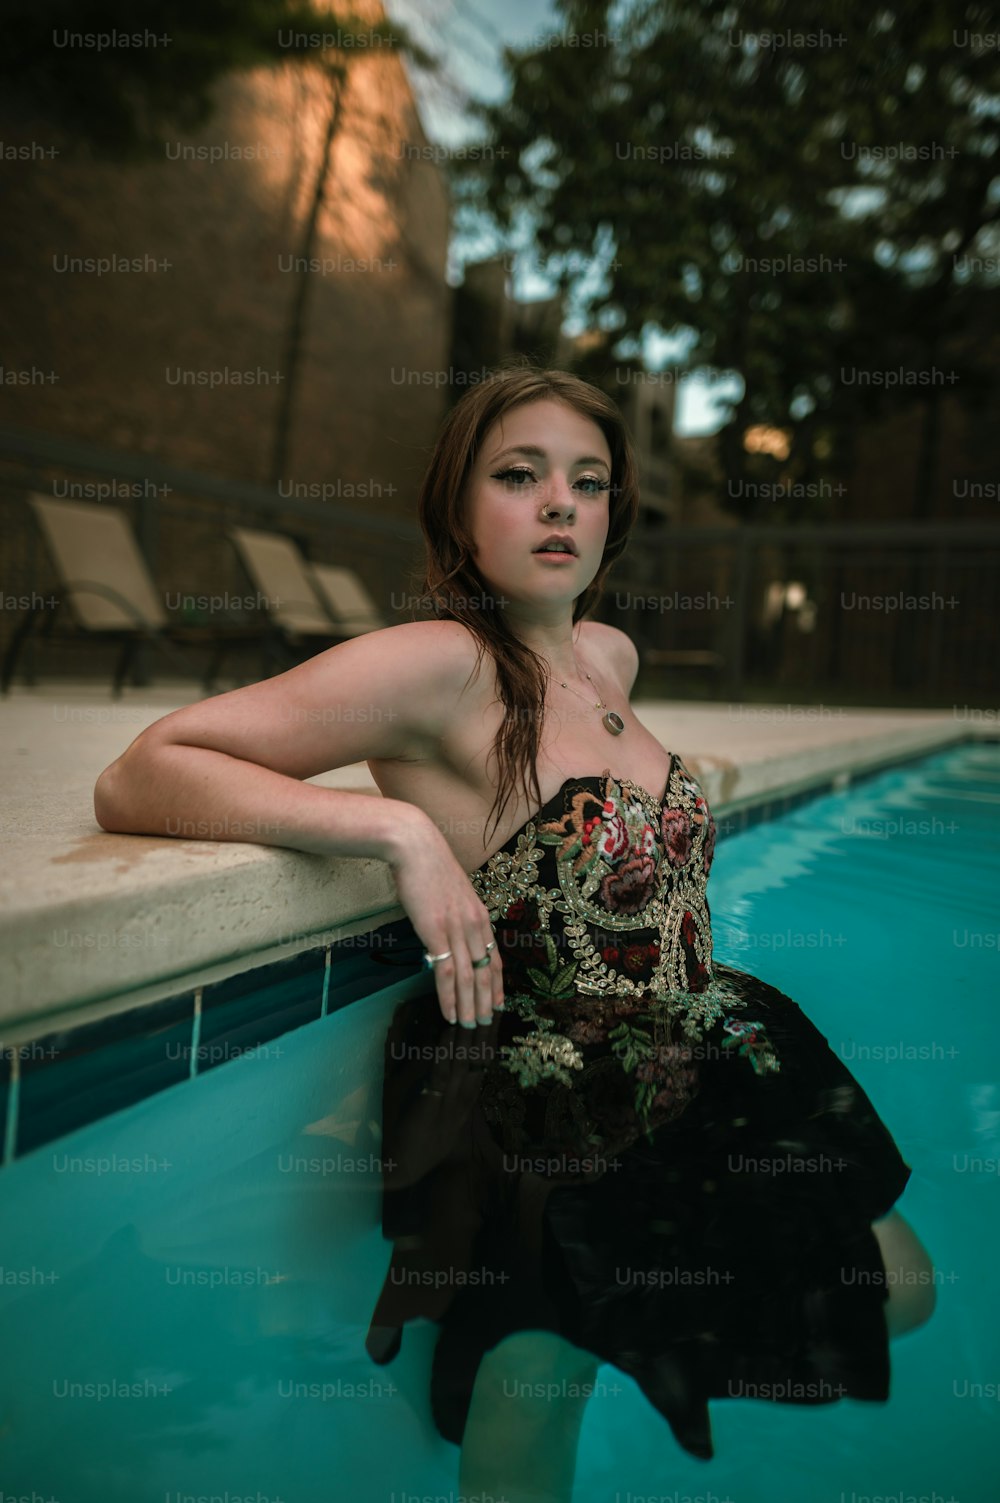 a woman in a black dress sitting on a ledge next to a swimming pool